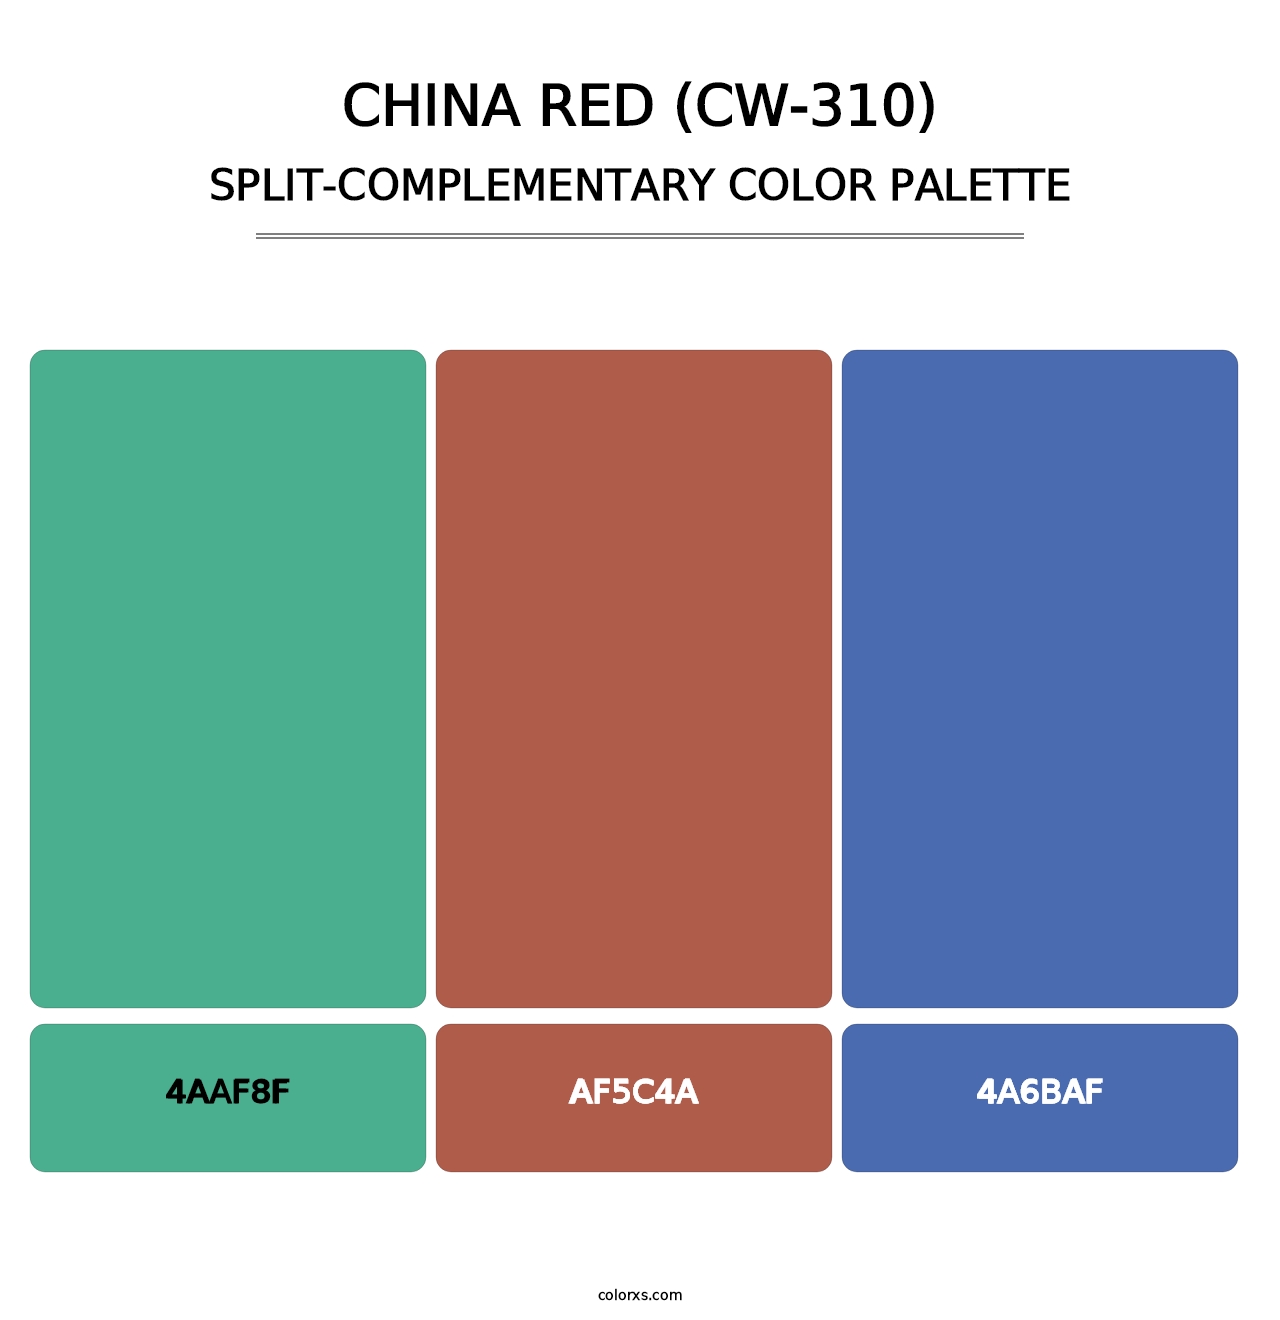 China Red (CW-310) - Split-Complementary Color Palette